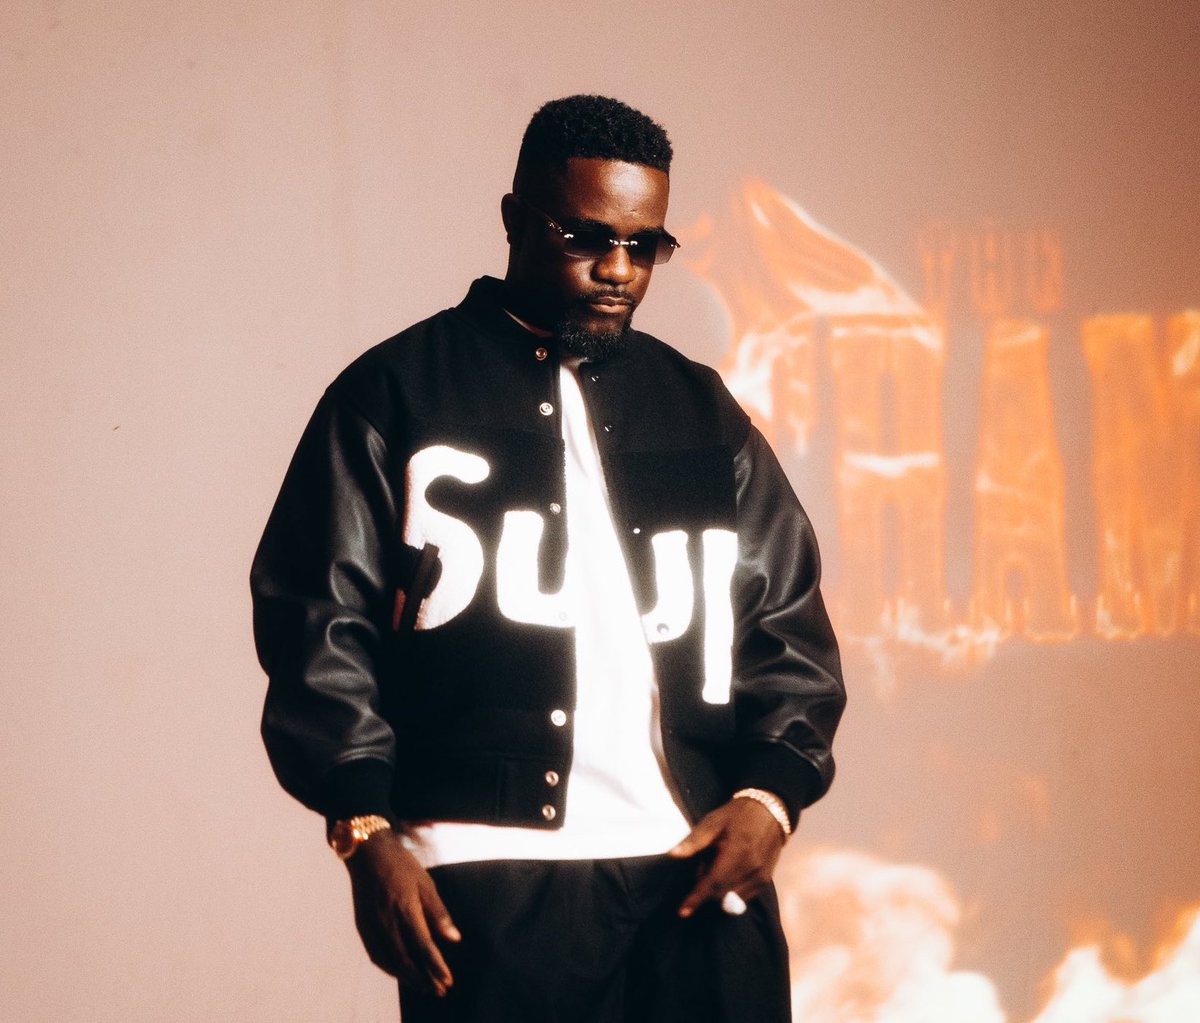 In the dominance of Afrobeat rapper sarkodie still rules, you don’t wanna touch him. Still #BRAG , stream here 👇

youtu.be/CO2l8ekPH2Y?si… 

and anticipate #TheChampionShipTape is coming!